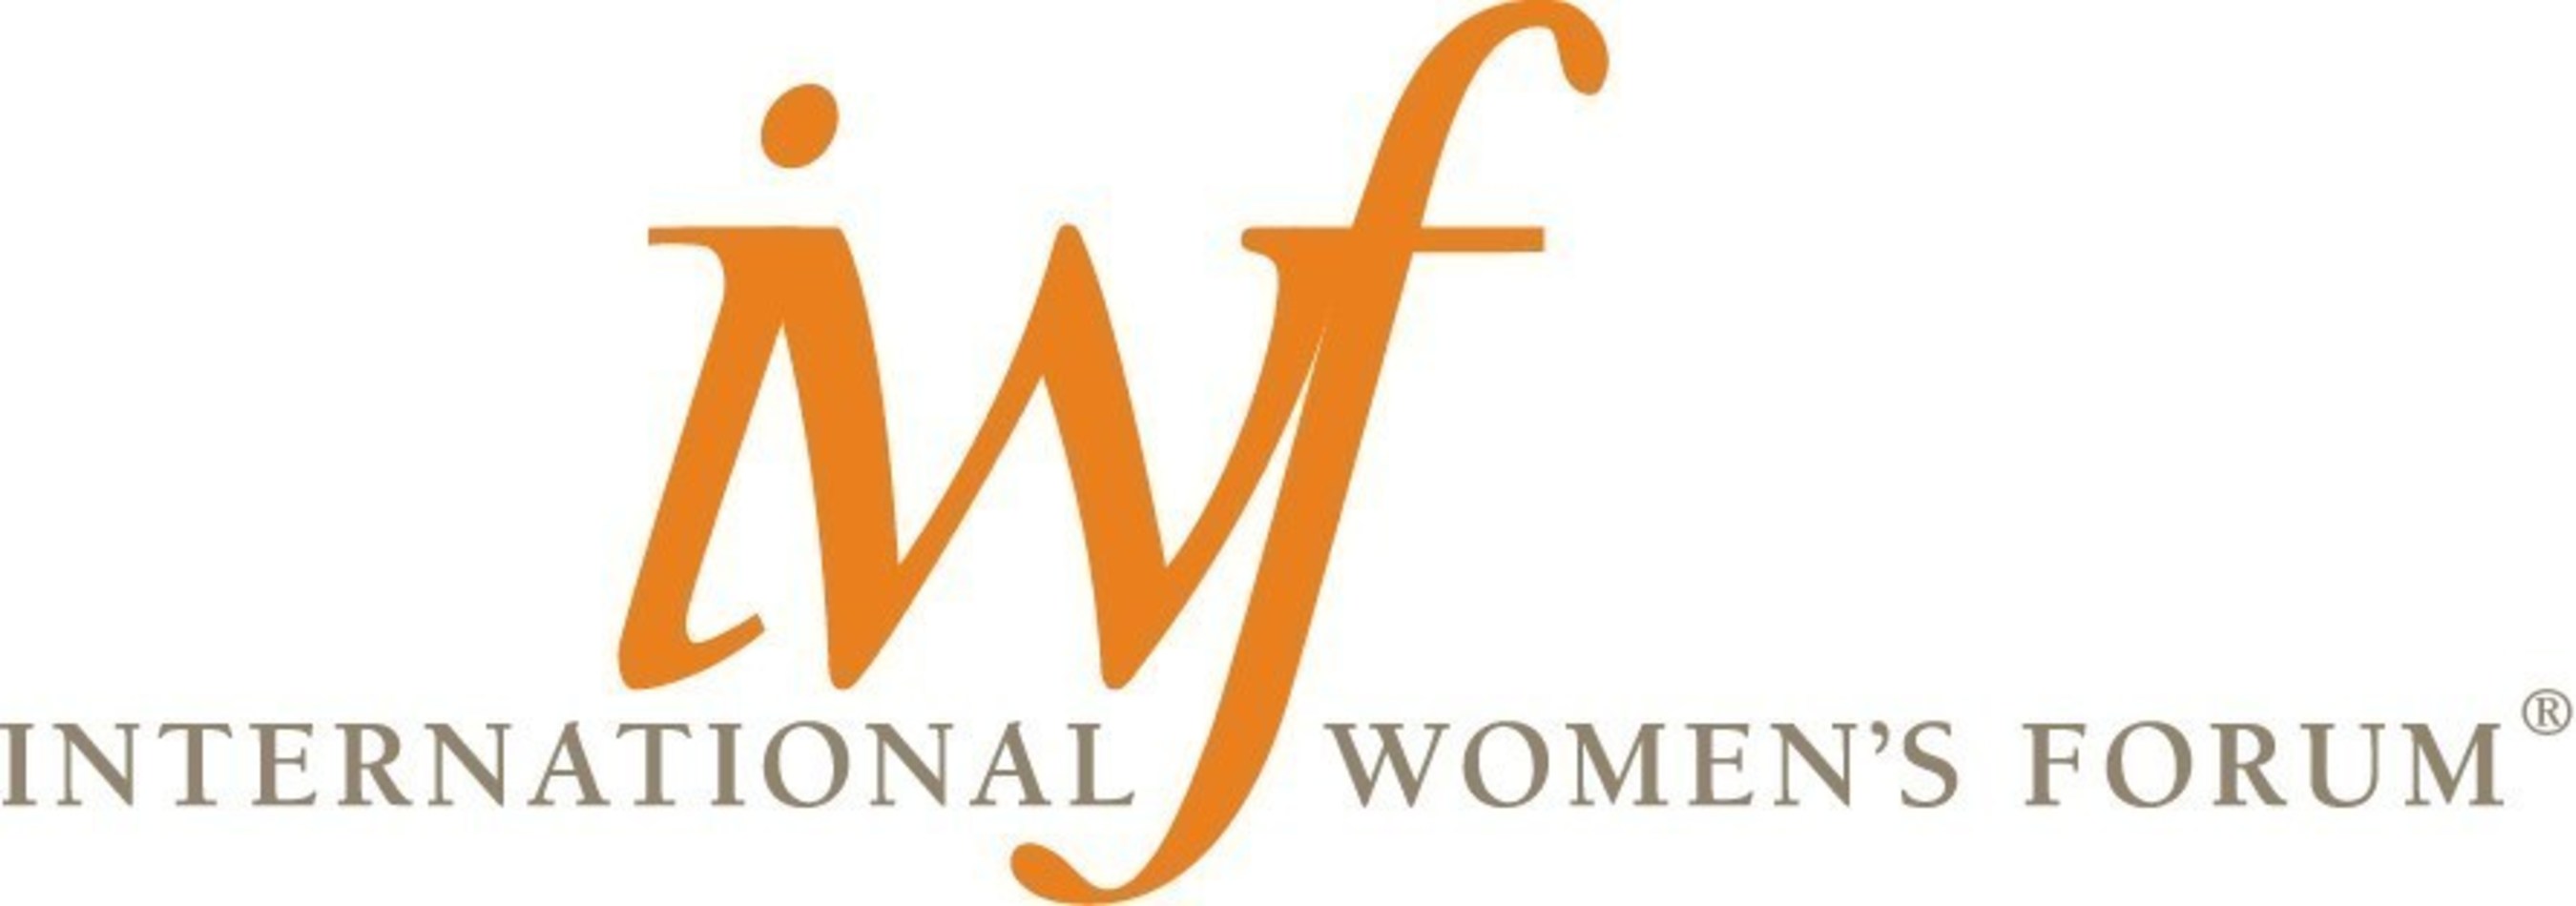 The International Women's Forum will host its 2015 World Leadership Conference in Boston on October 28-30, 2015, bringing together more than 850 senior global women leaders to address imminent solutions for today's most pressing global challenges.